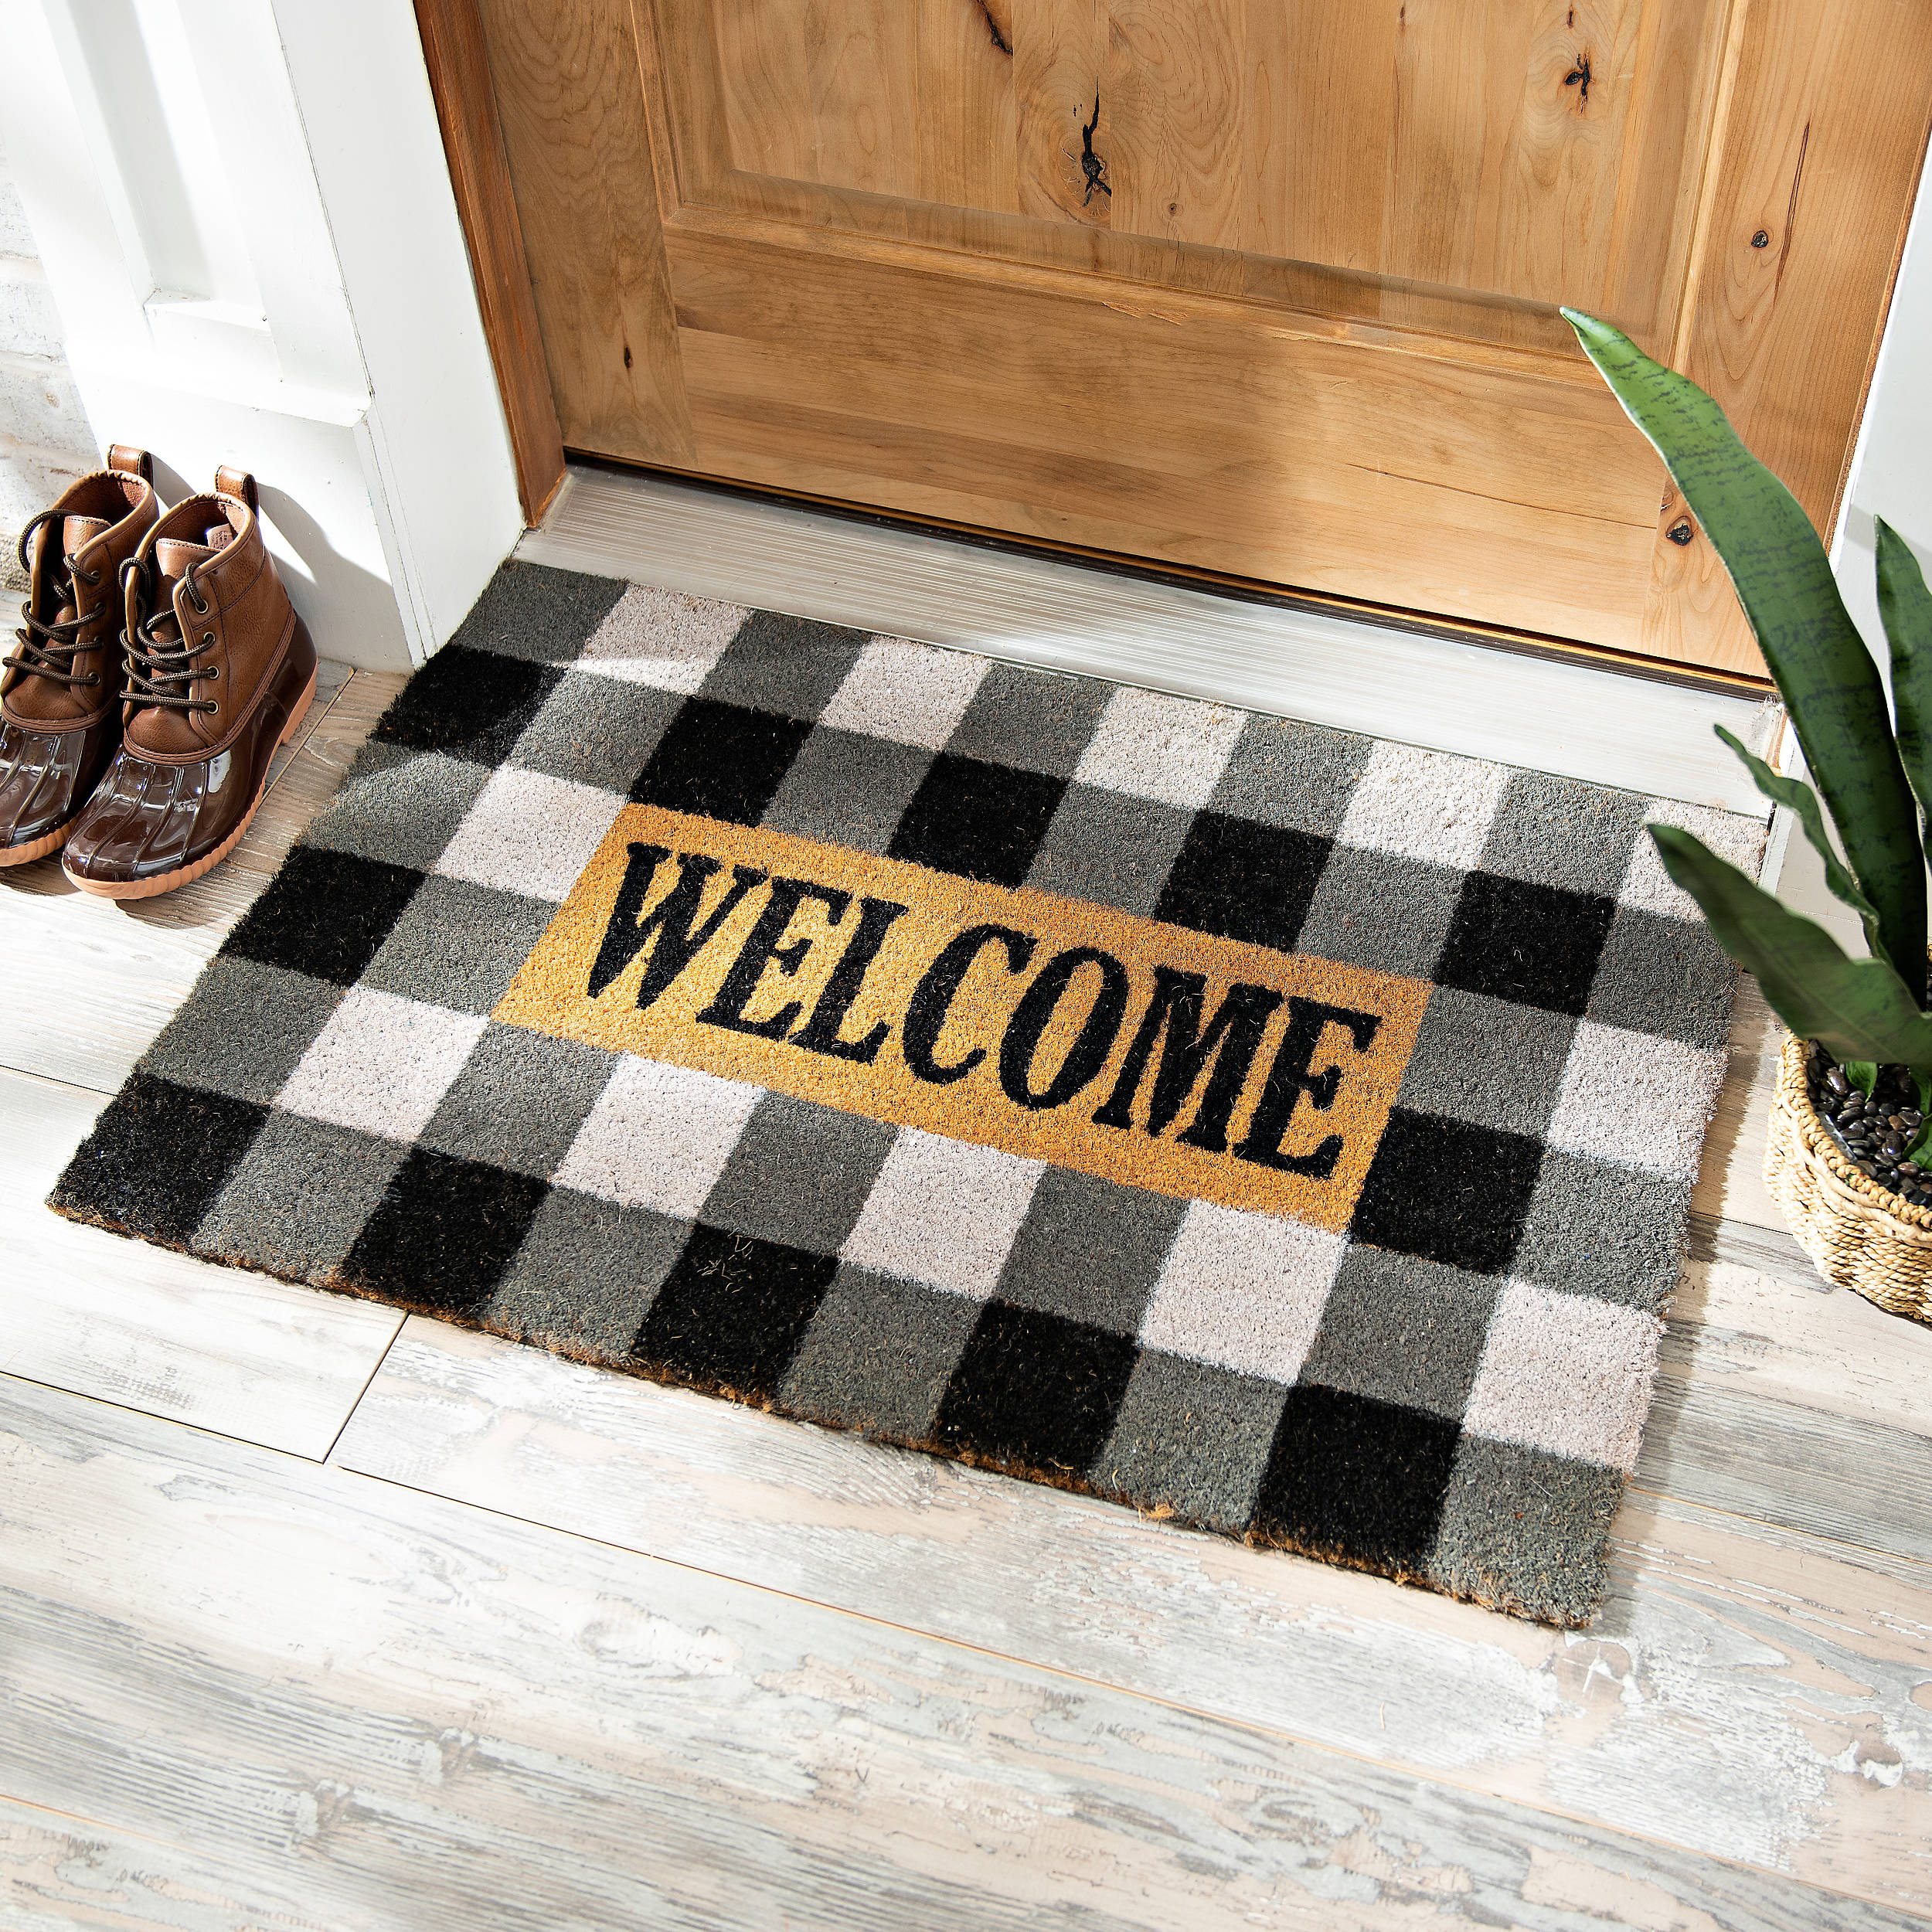 Checkered Welcome Coir Doormat Natural Fiber Black and White Plaid 18" x 30" 